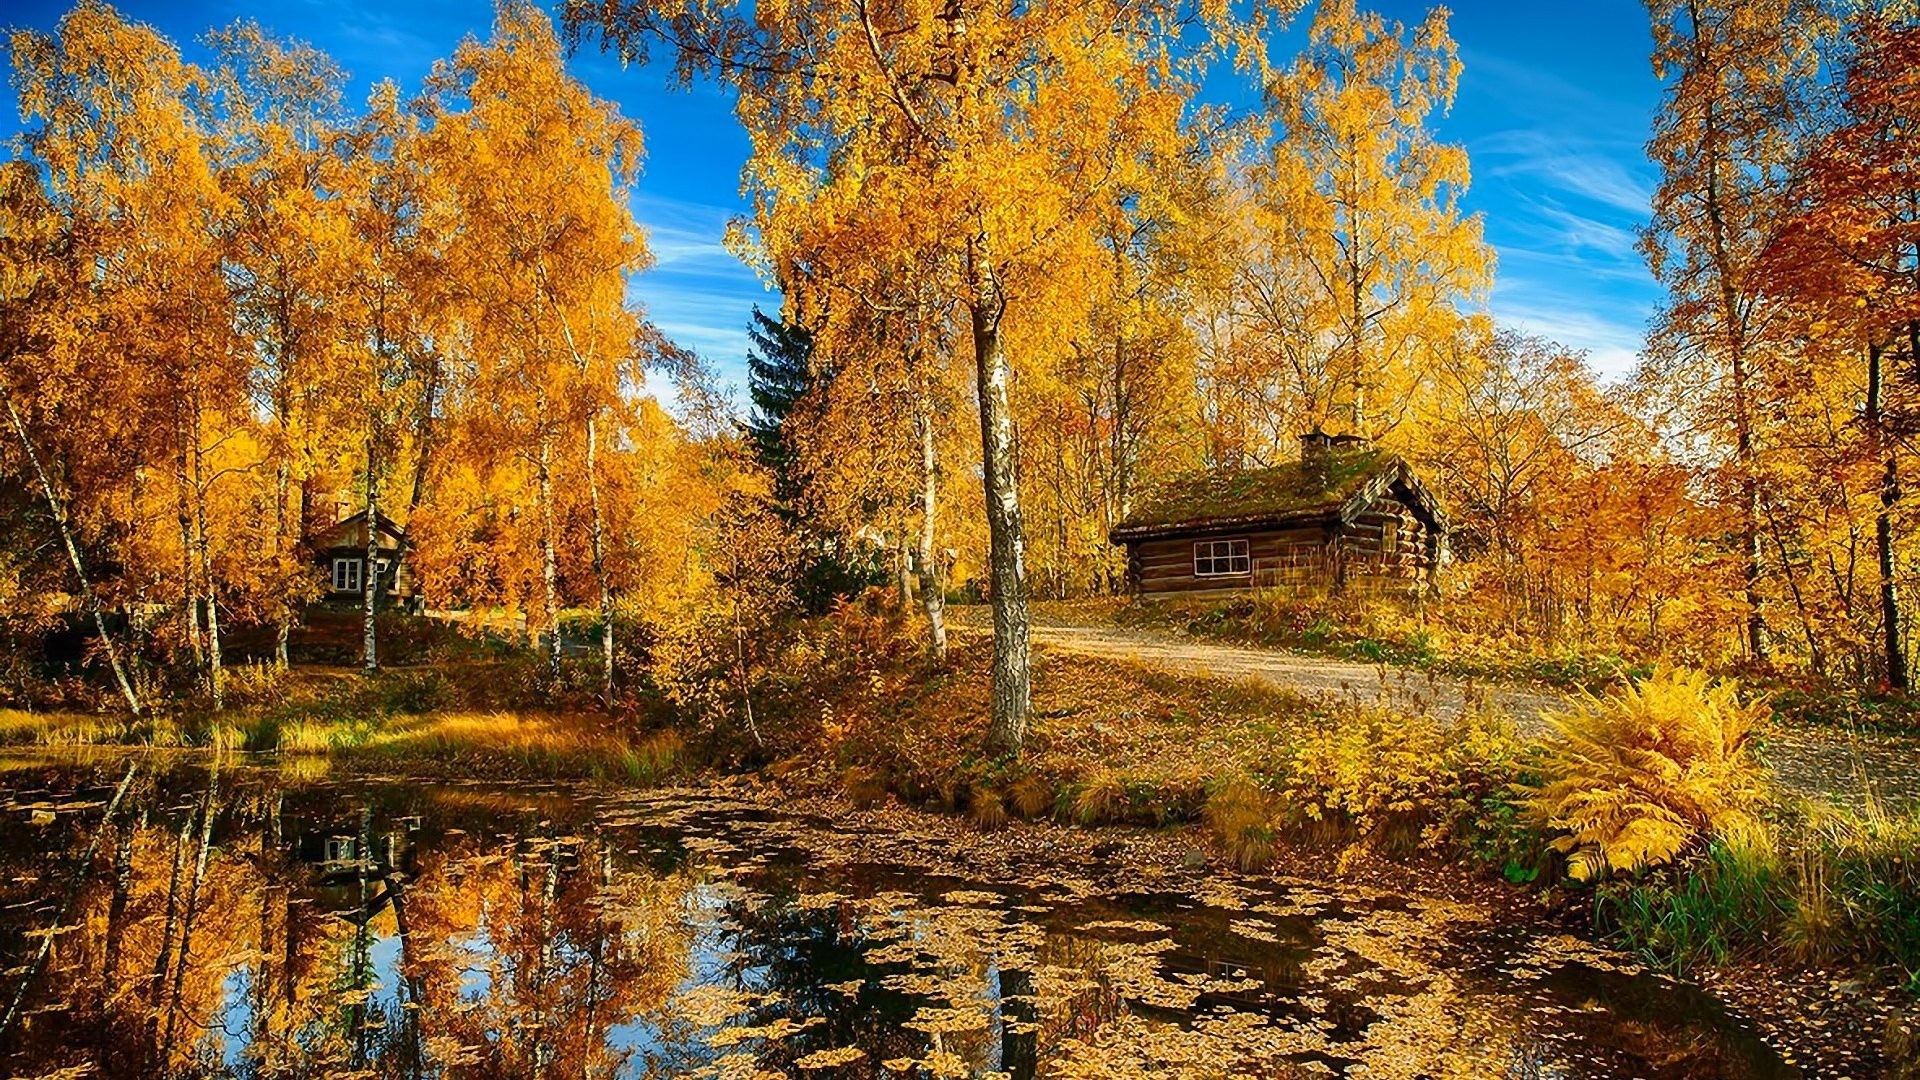 1920x1080 Autumn Tag - Nature House Landscape Trees Road Lake Norway Autumn Picture  Free for HD 16